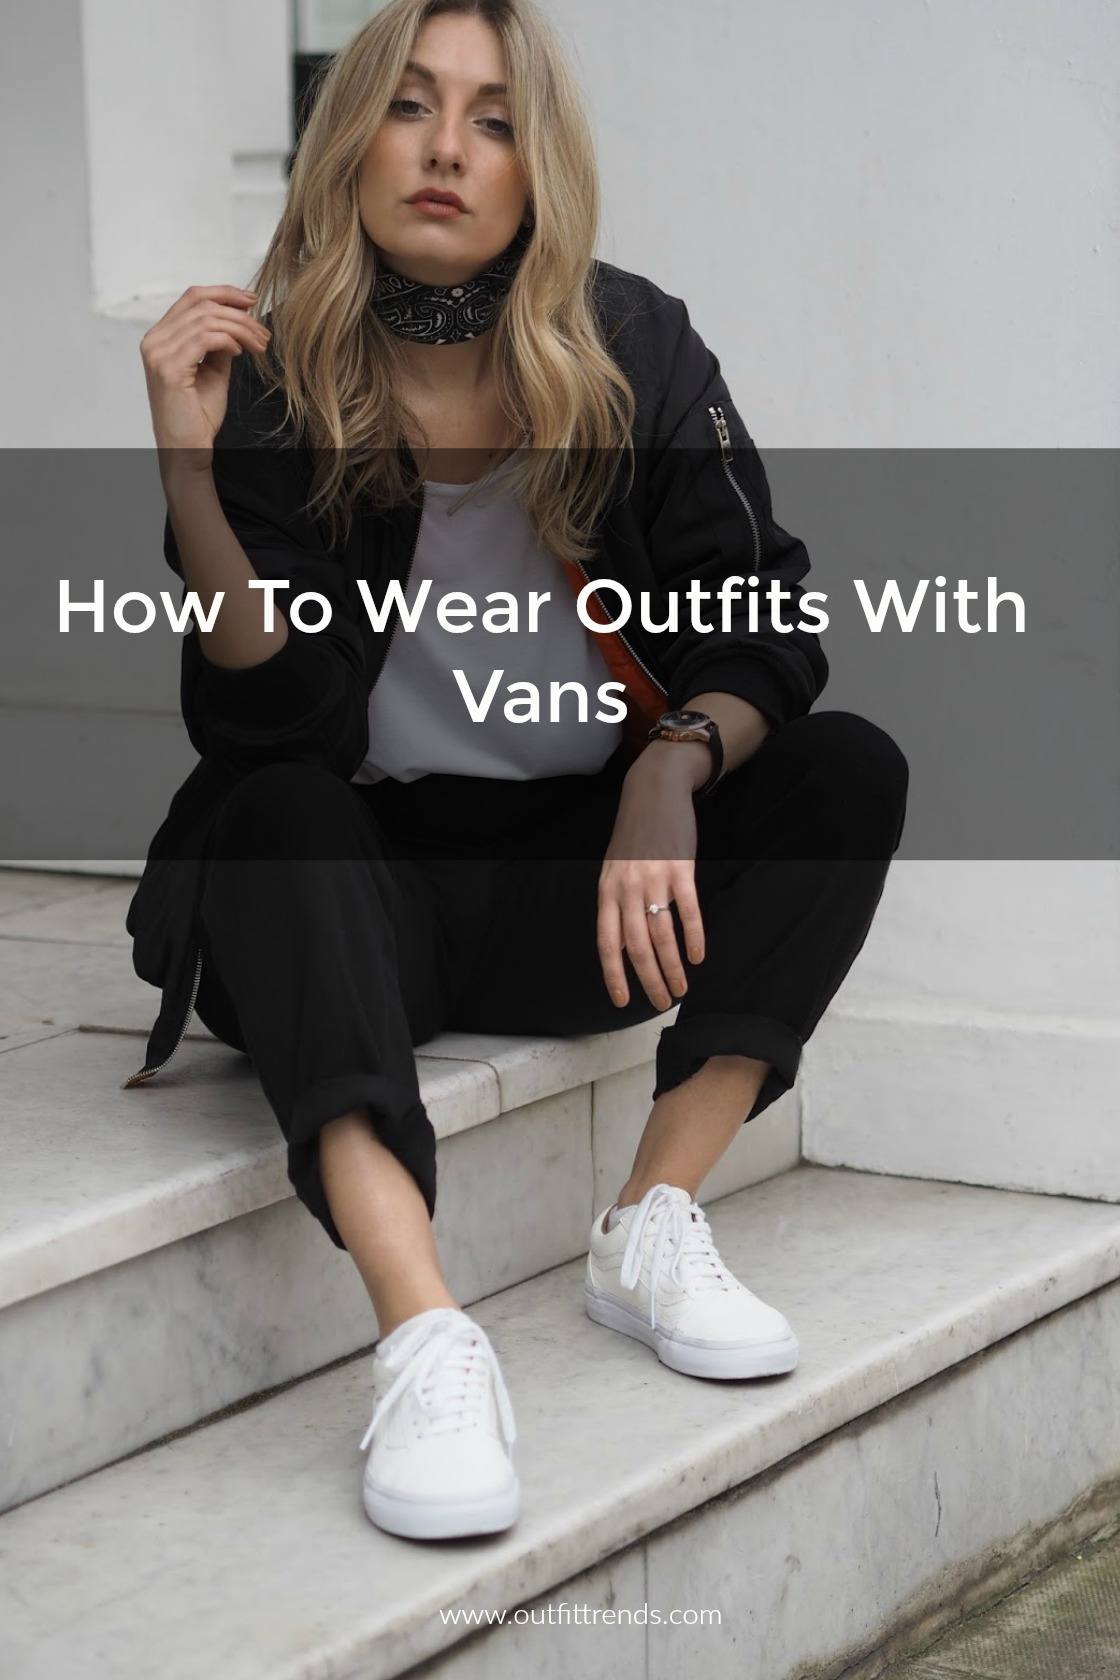 Women’s Outfits with Vans-30 Outfits to Wear with Vans Shoes